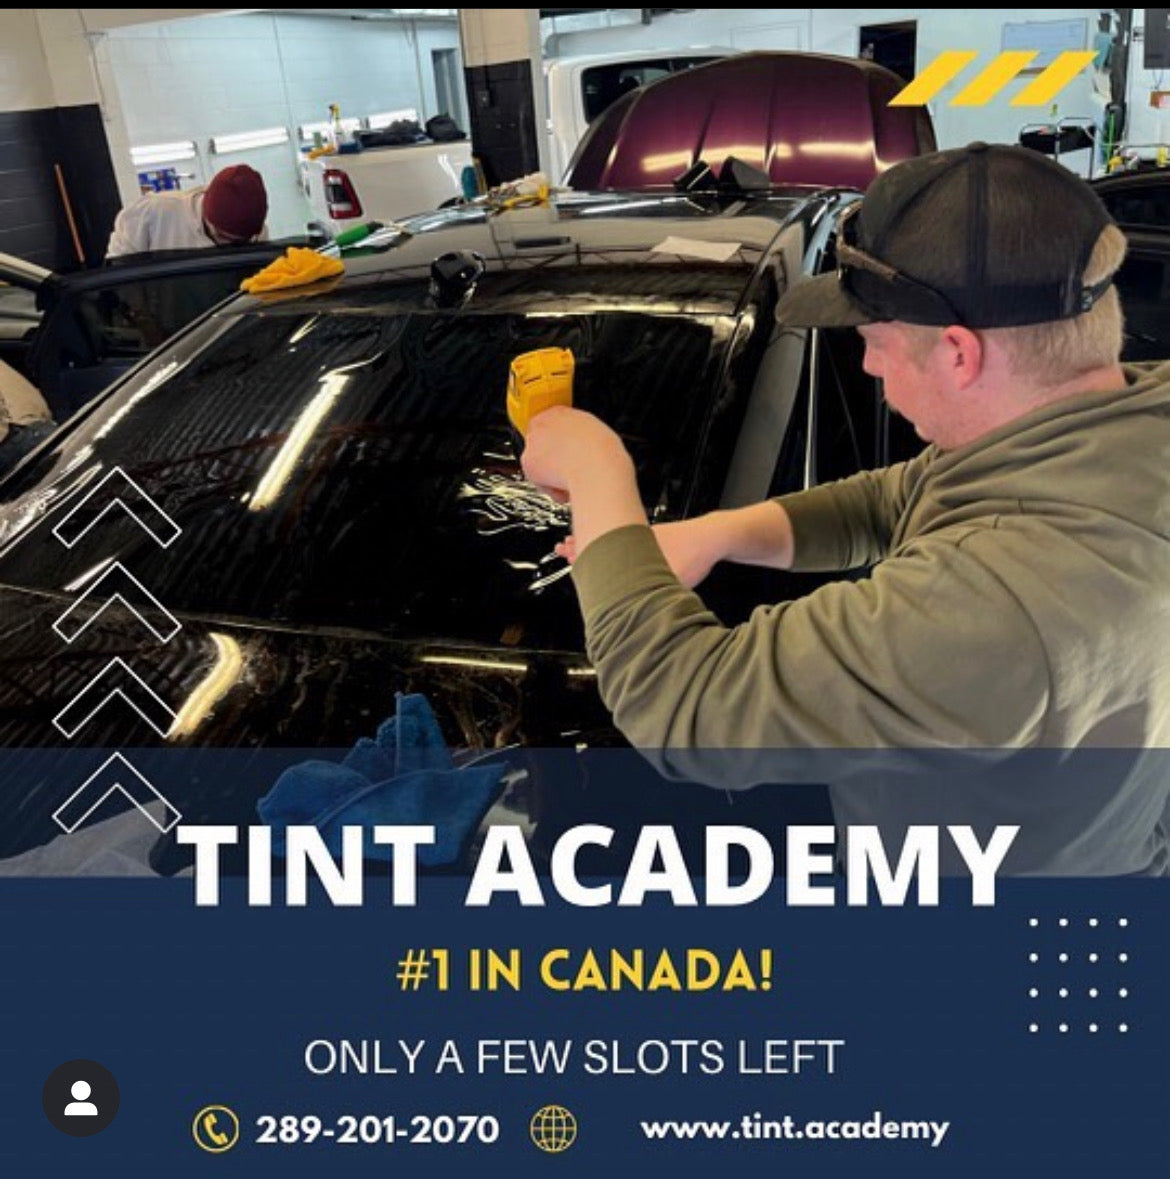 Learn Window Tinting In Toronto at Lab Oakville and Scarborough- With the LAB - Oakville & Scarborough